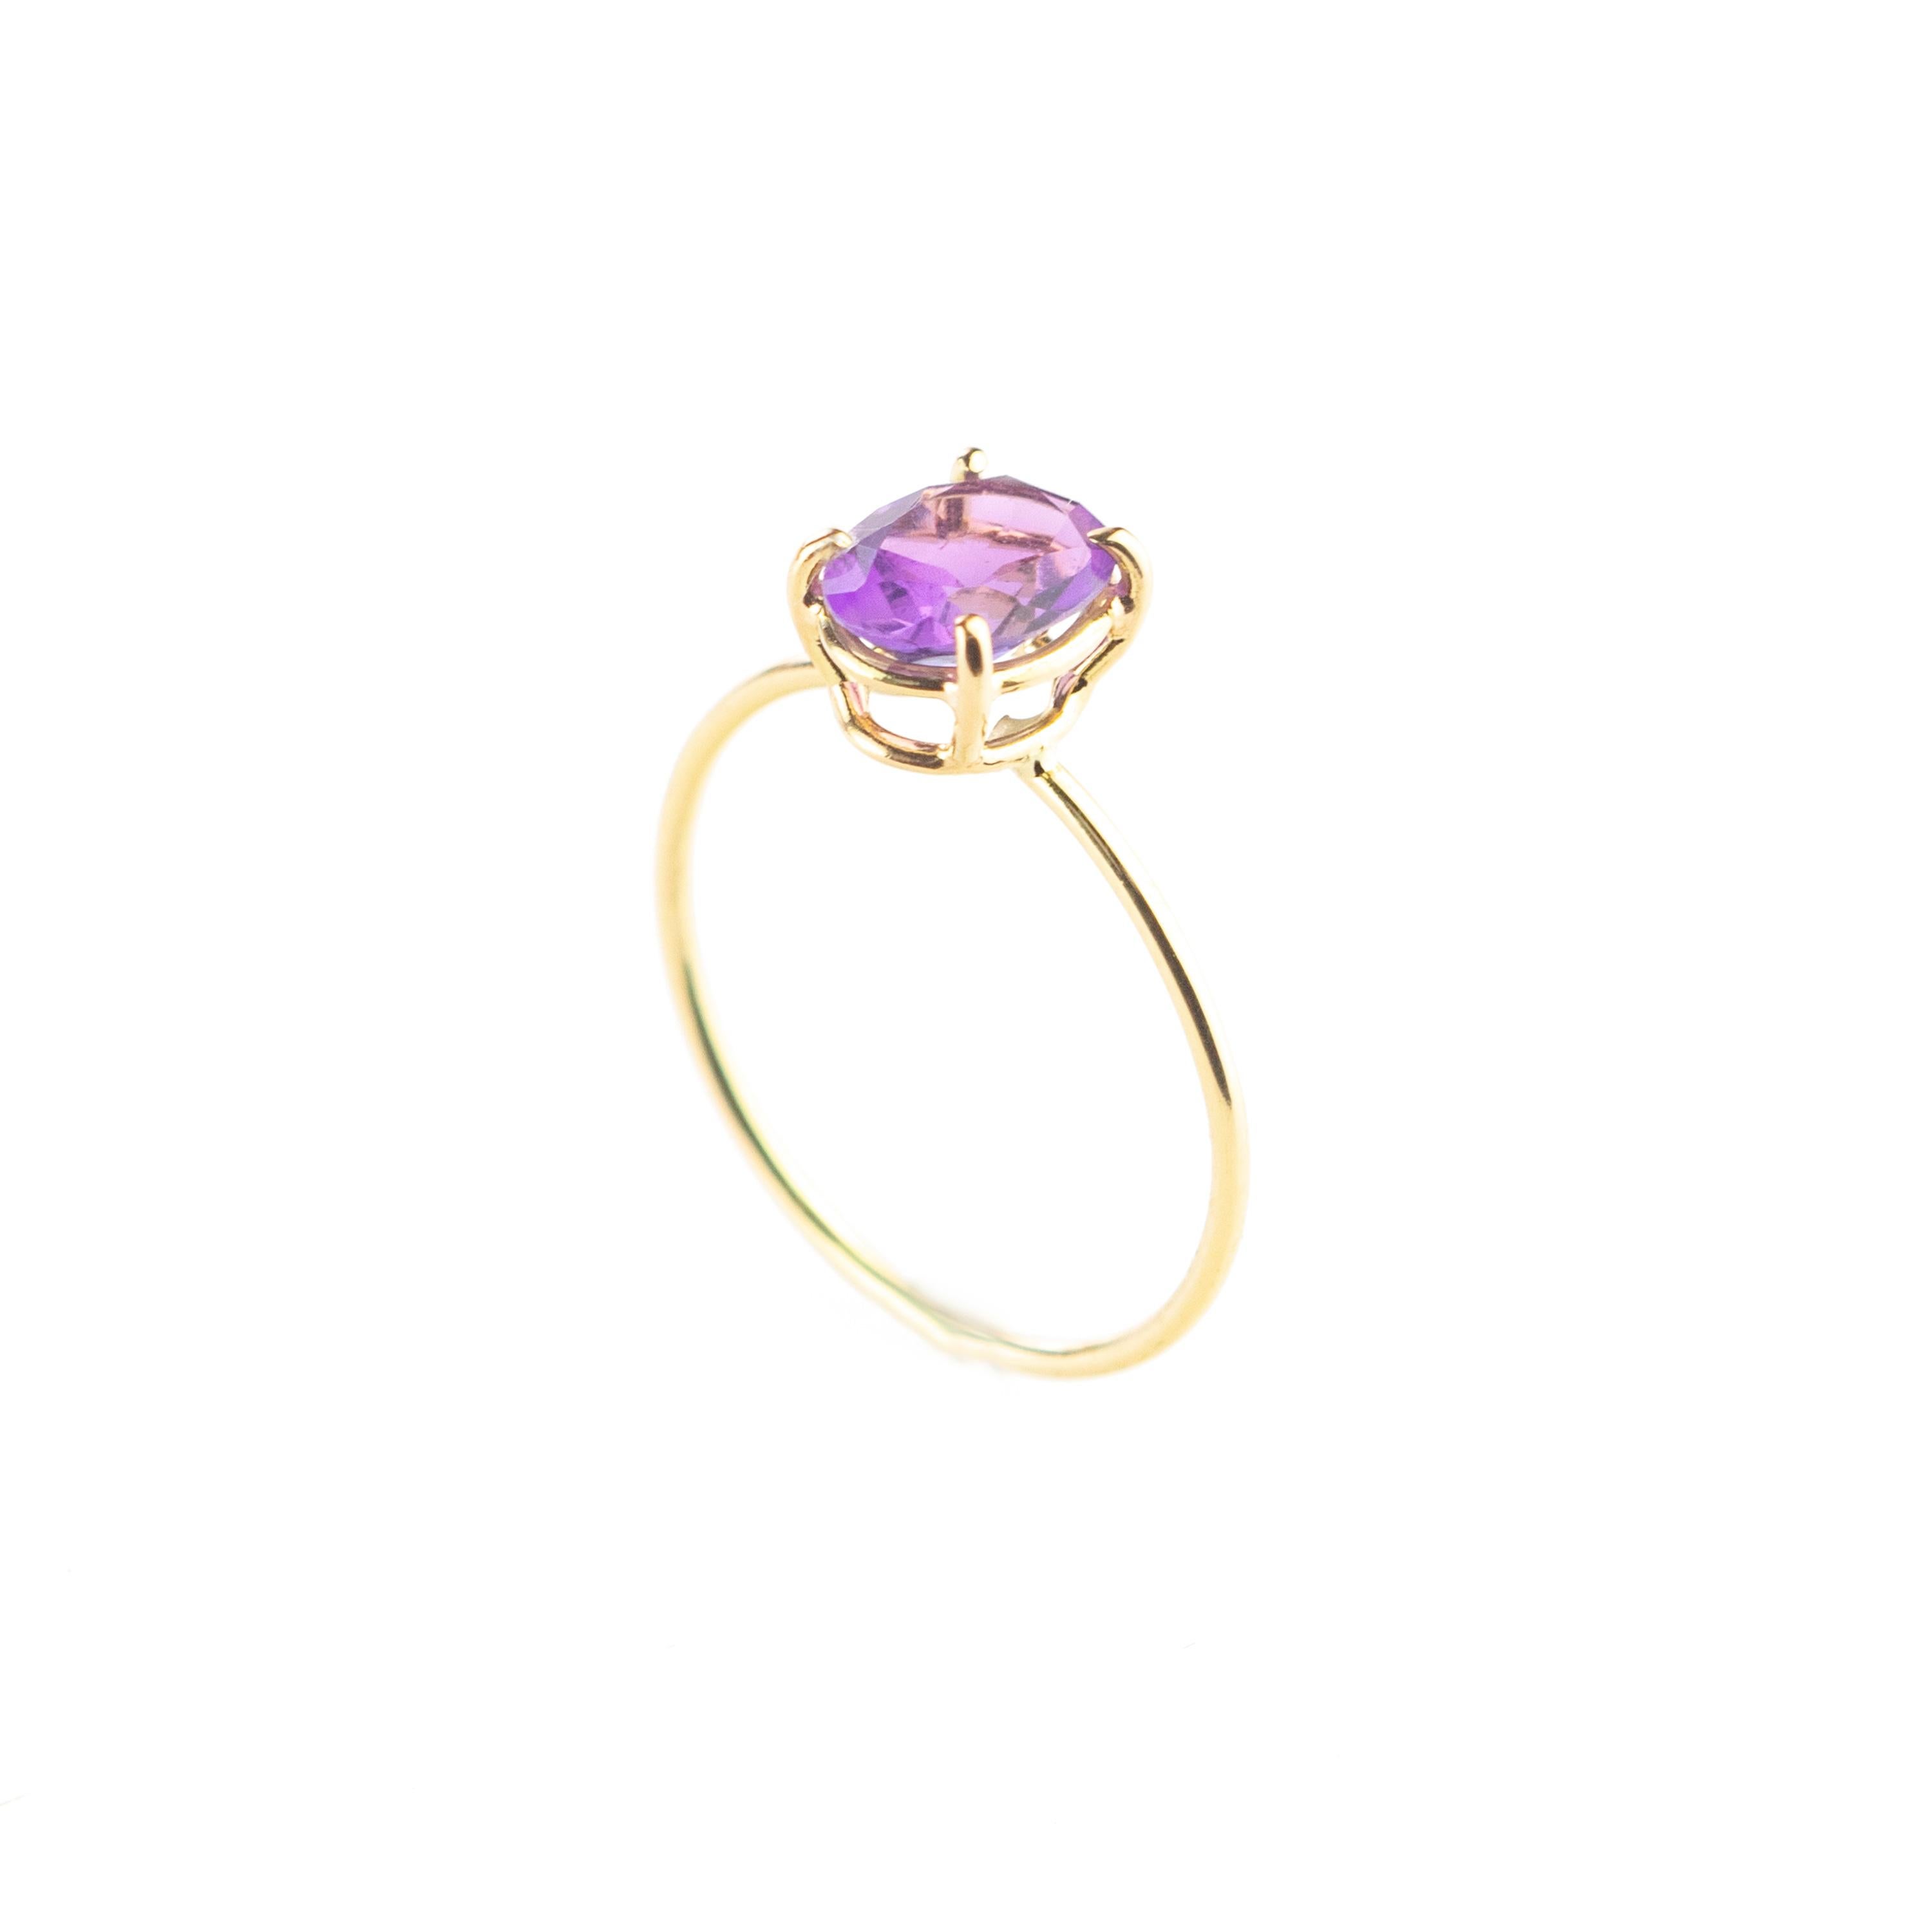 Romantic Natural Amethyst Faceted Oval Carat 18 Karat Yellow Gold Cocktail Ring